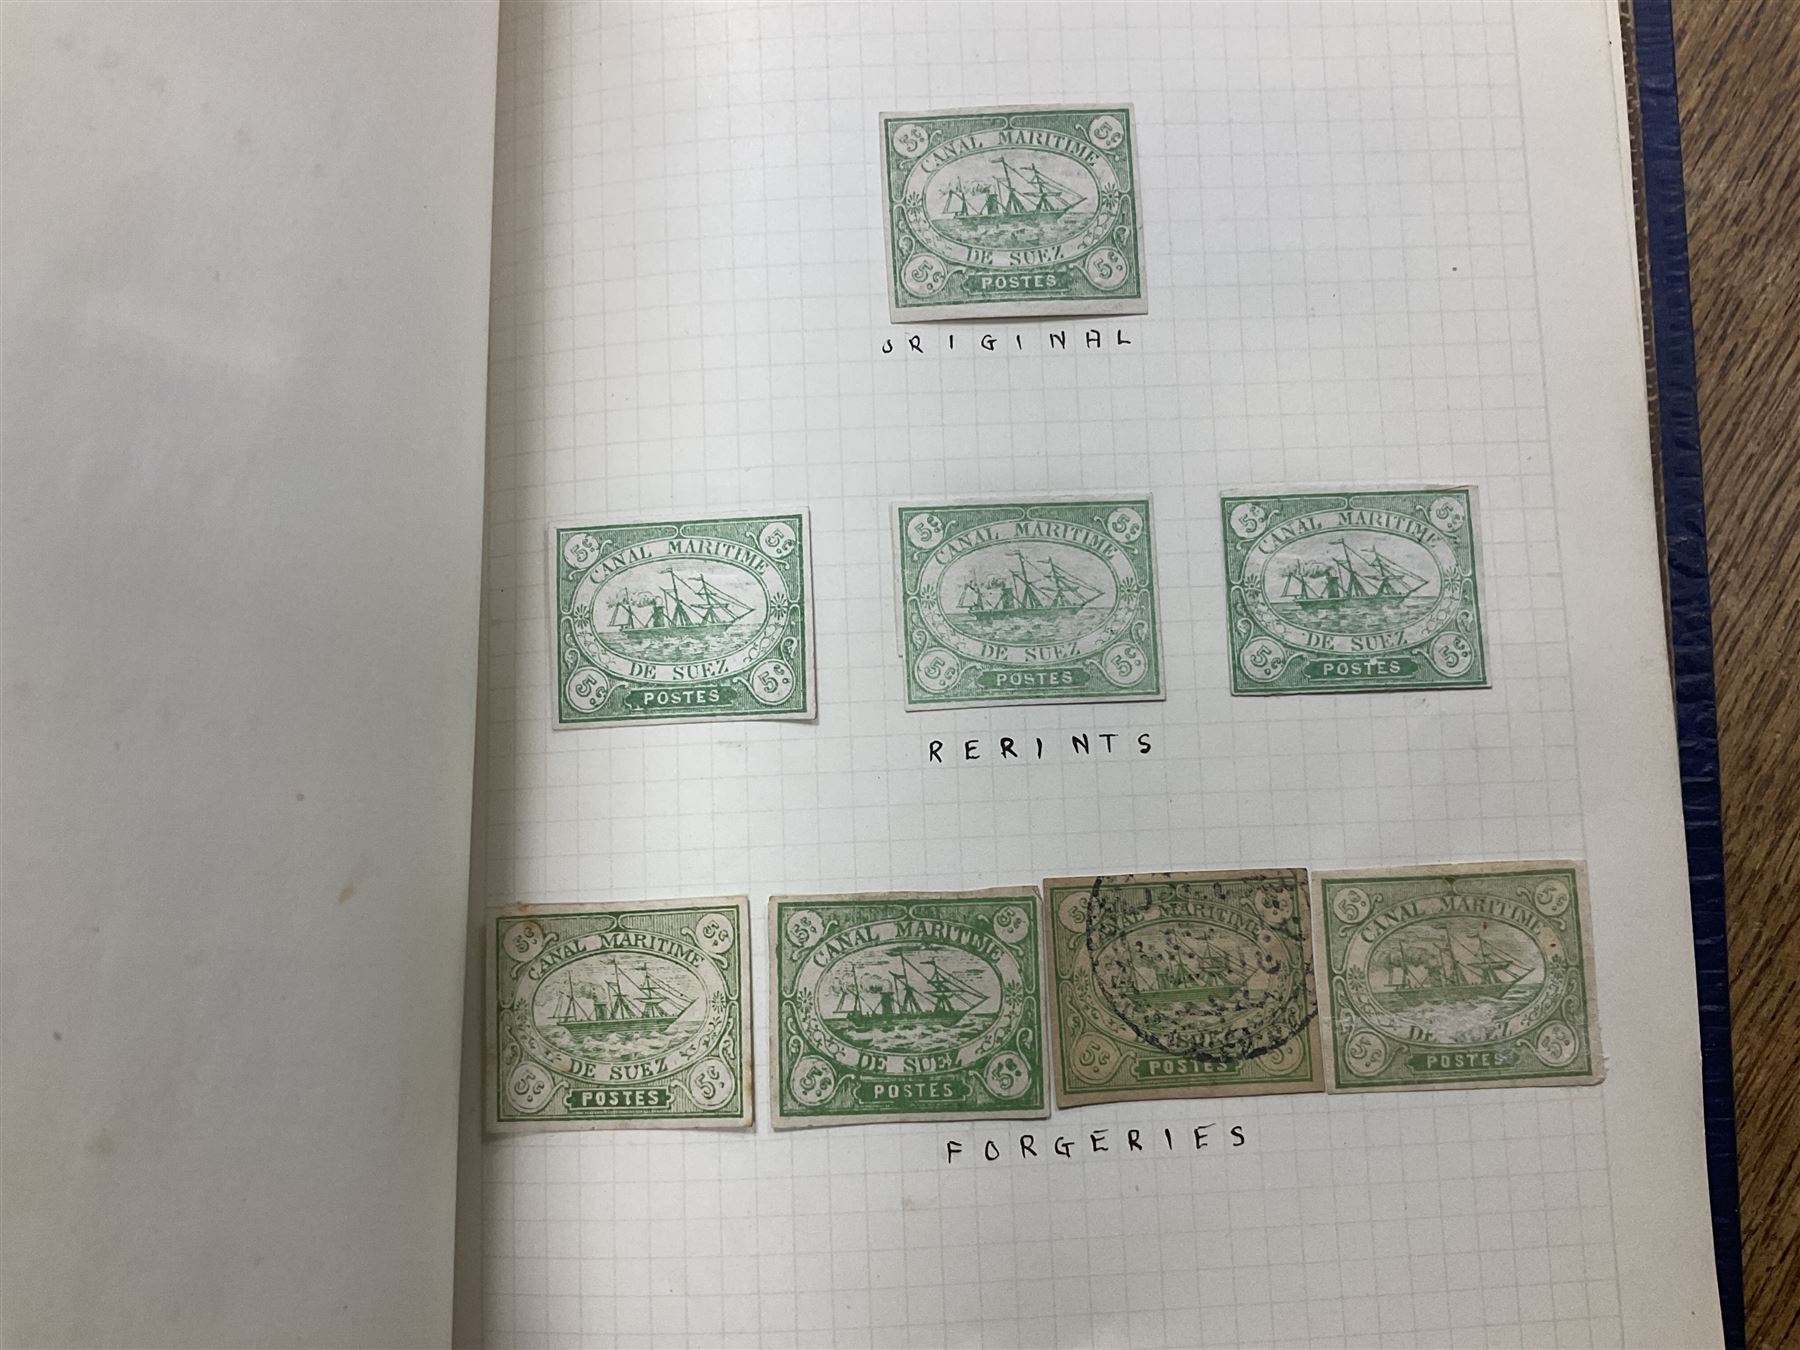 Egypt 1866 and later stamps - Image 359 of 761